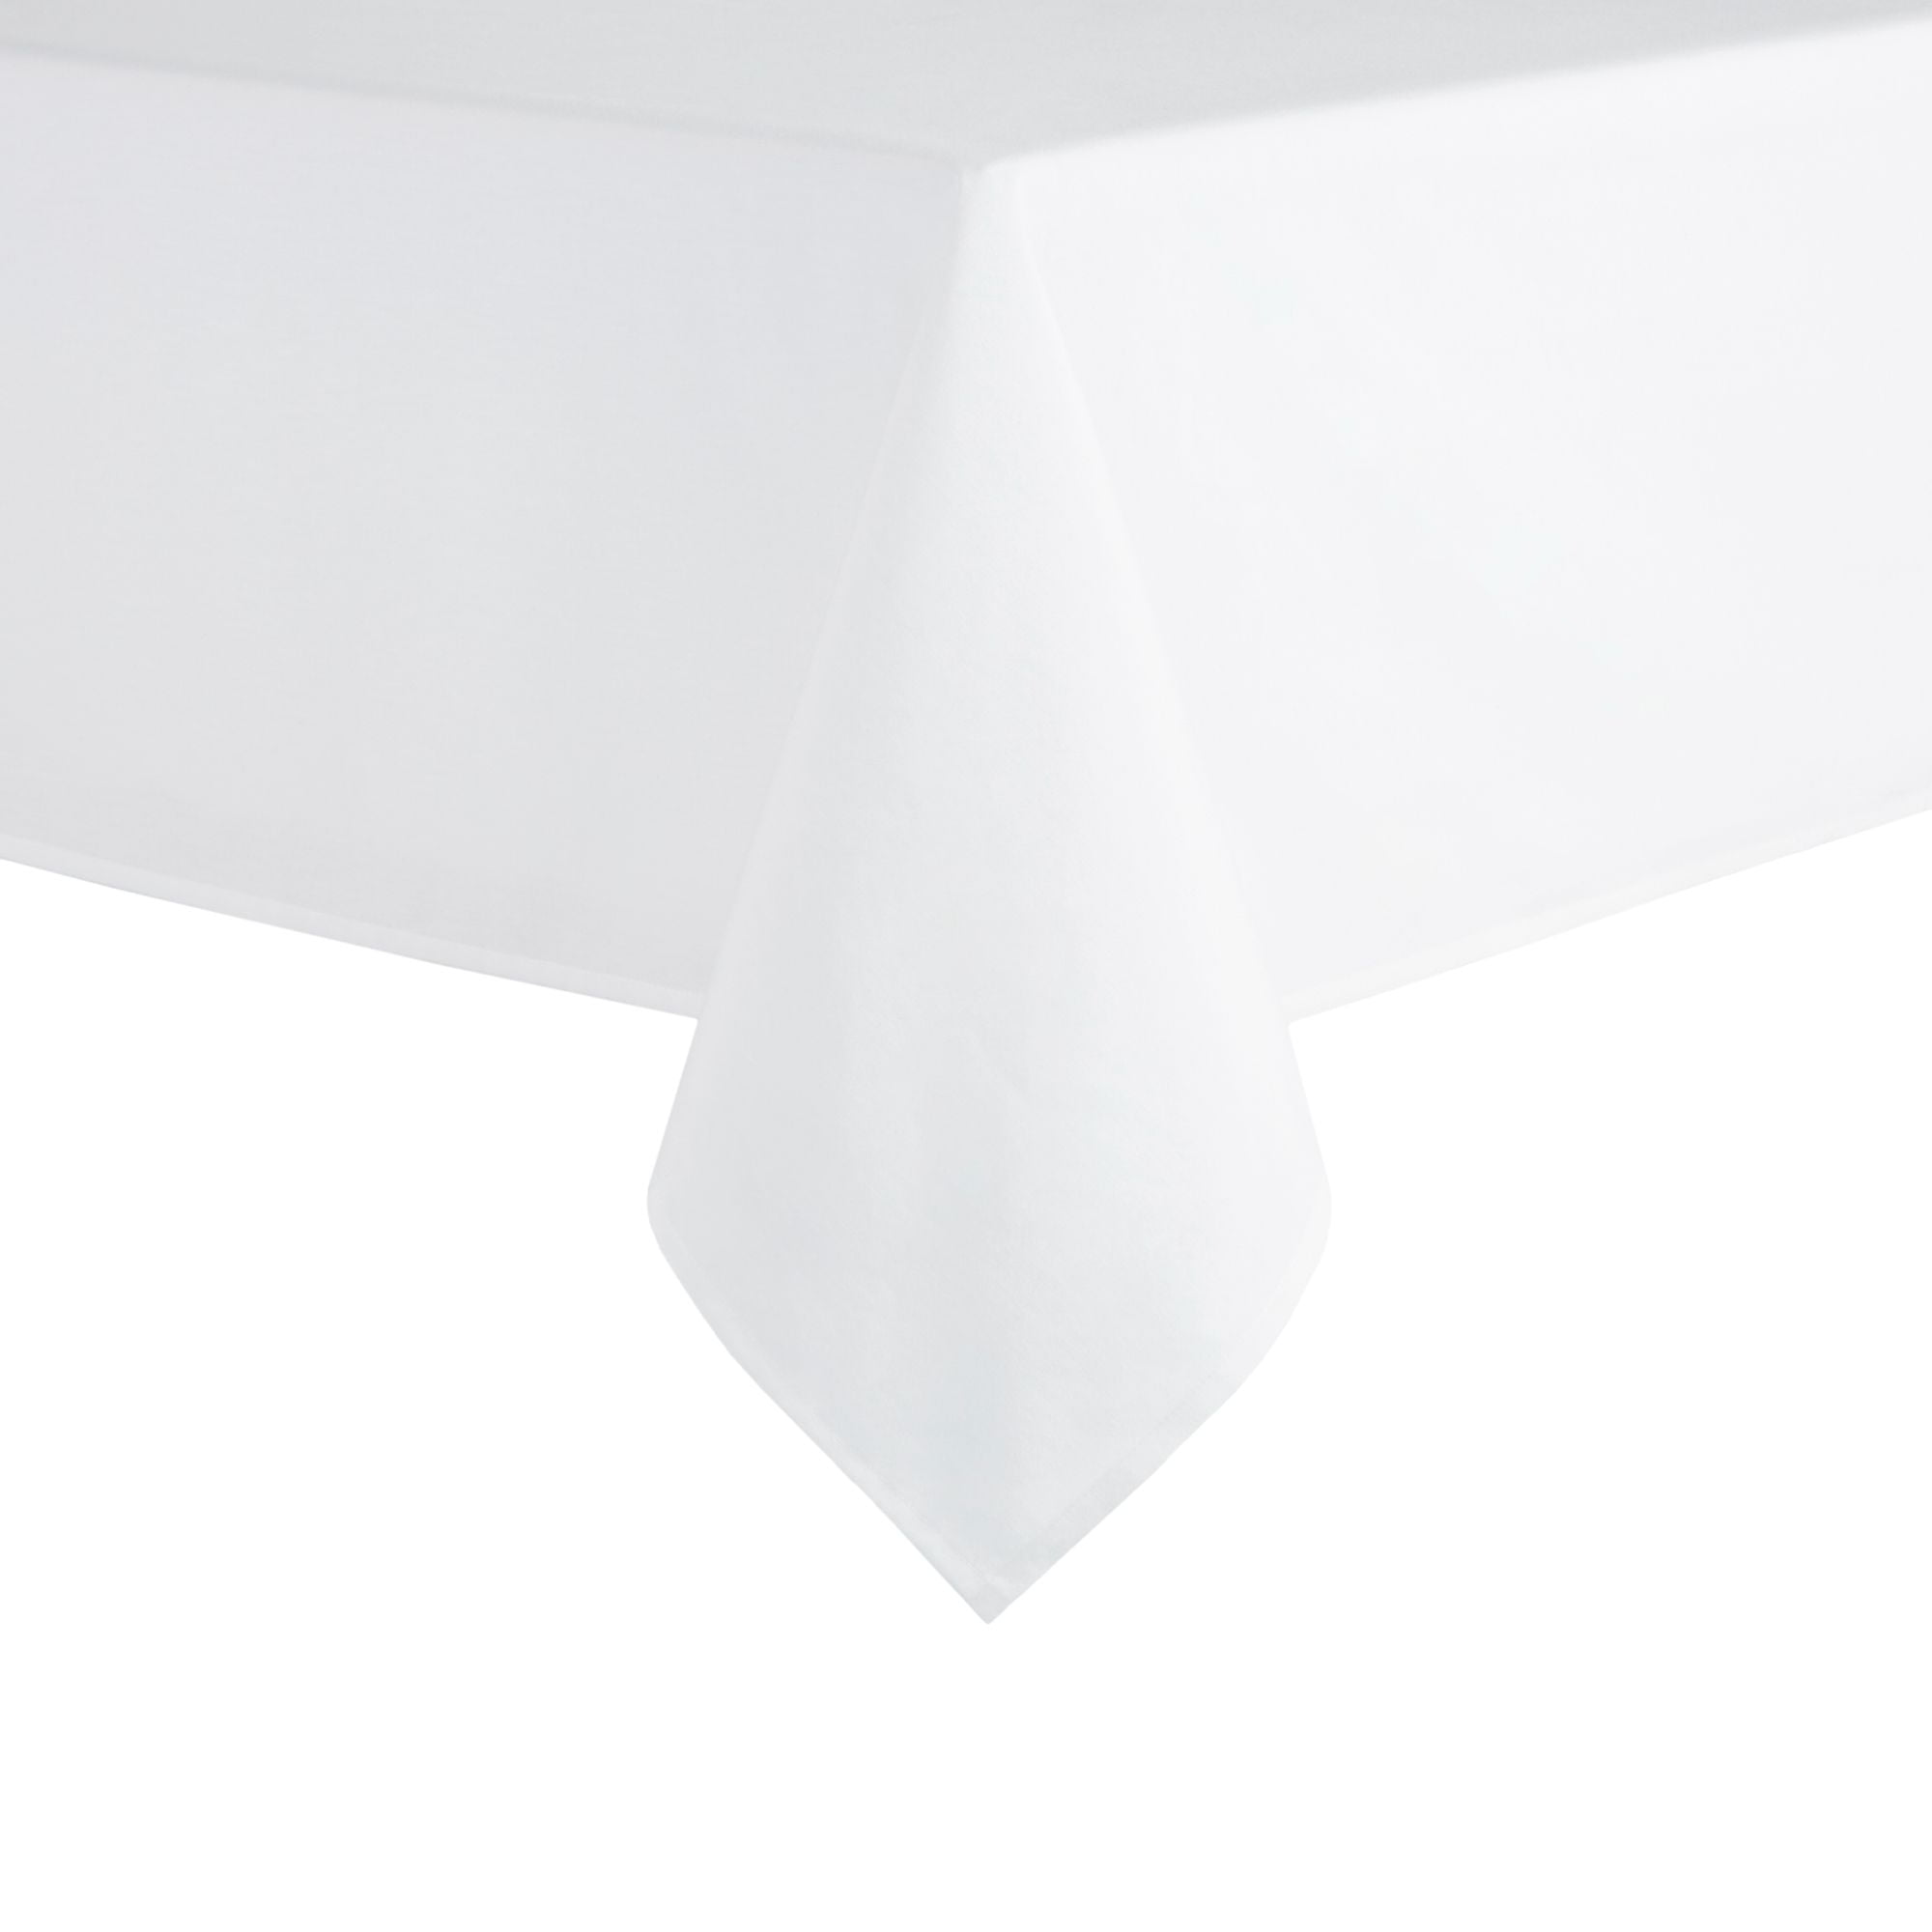 Mainstays Yale Tablecloth, White, 60"W x 84"L Rectangle, Available in various sizes and colors